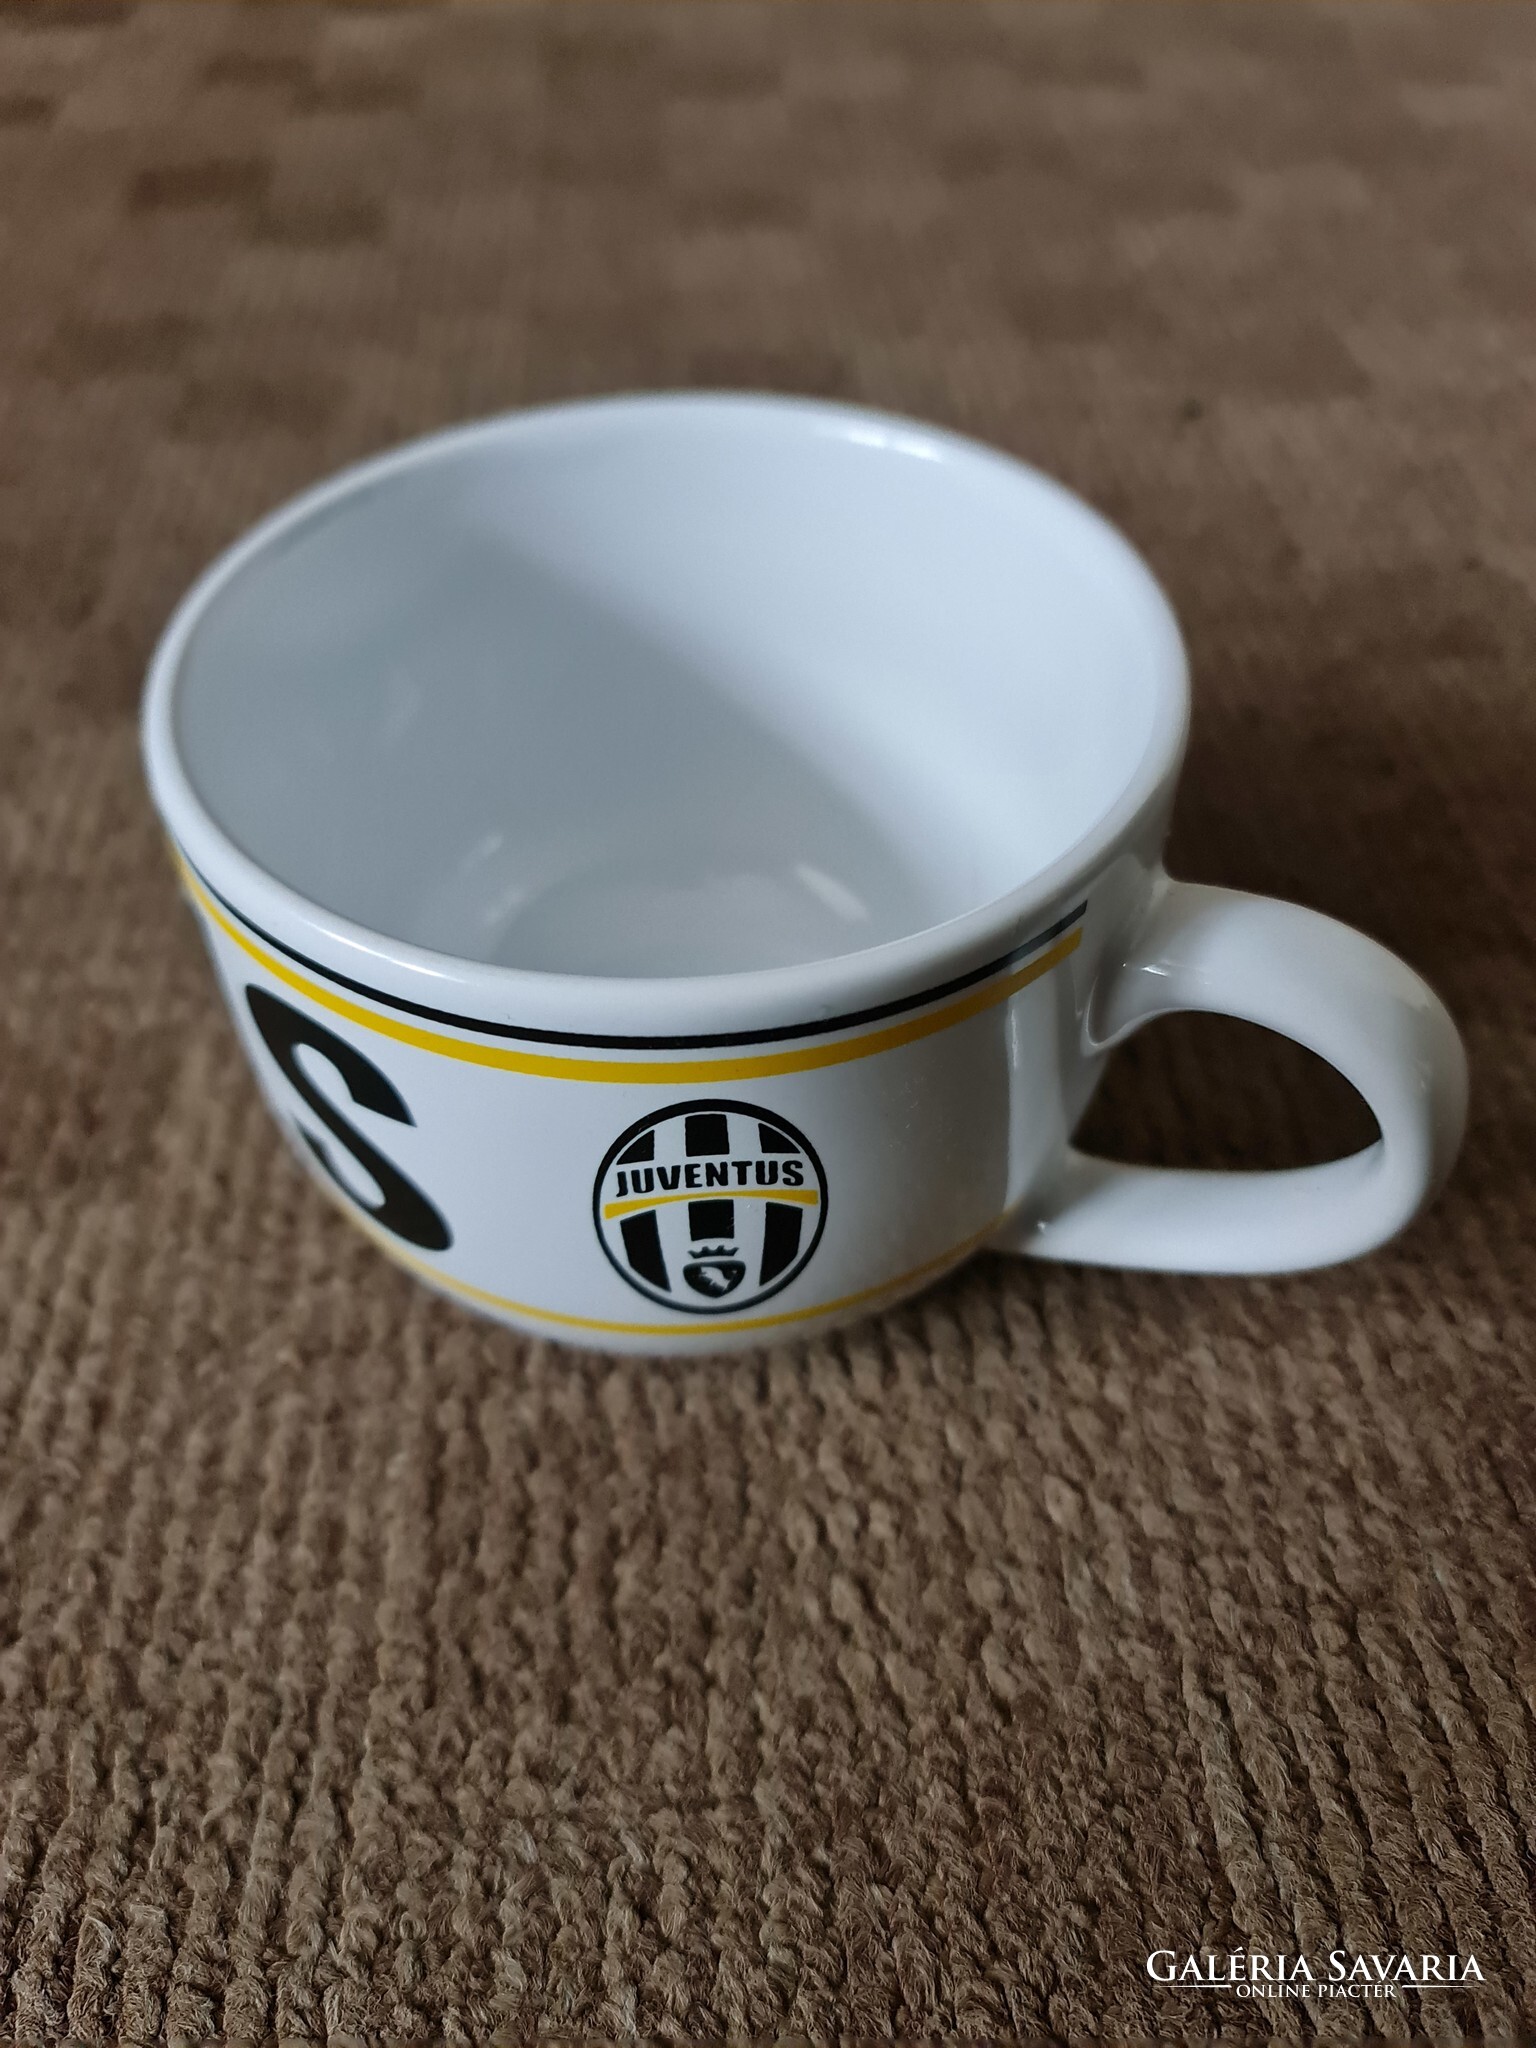 Juventus white and black mug - Pottery, Ceramics  Galeria Savaria online  marketplace - Buy or sell on a reliable, quality online platform!